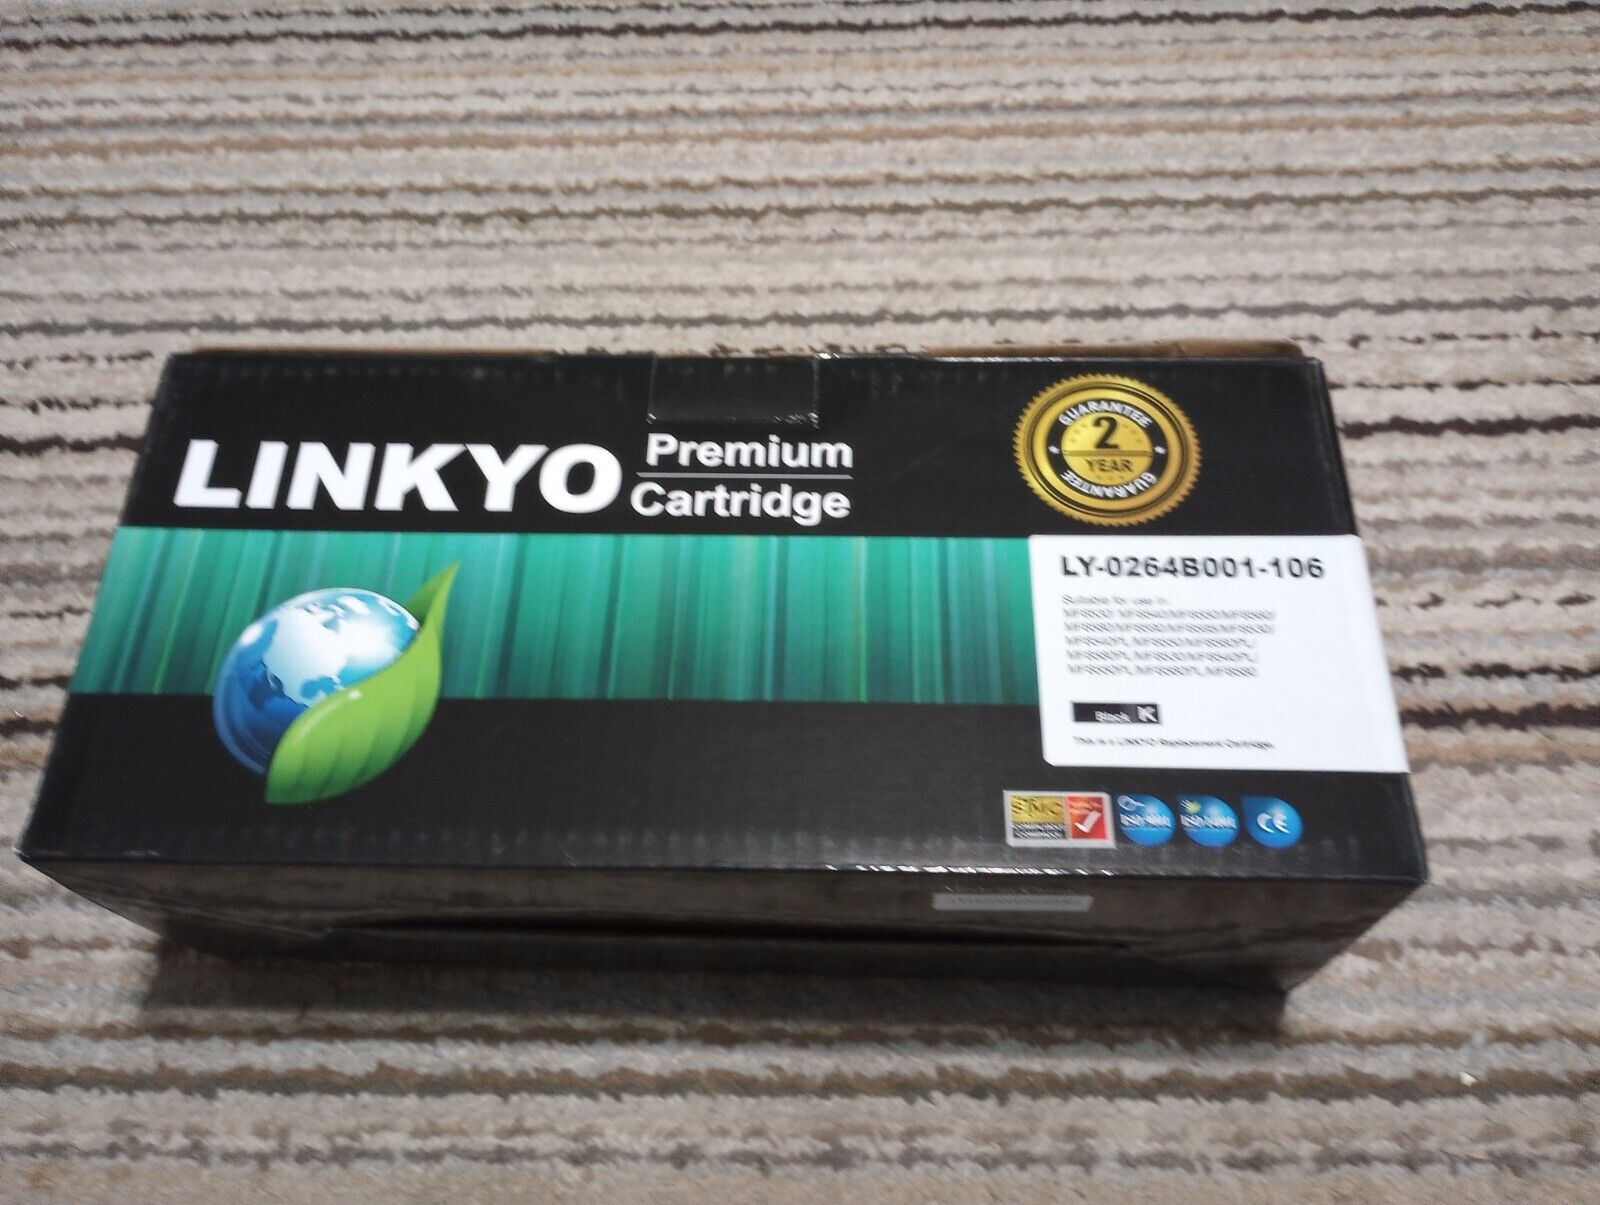 LY-0264B001-106 Linkyo Premium Replacement Cartridge Drum for Brother Blk